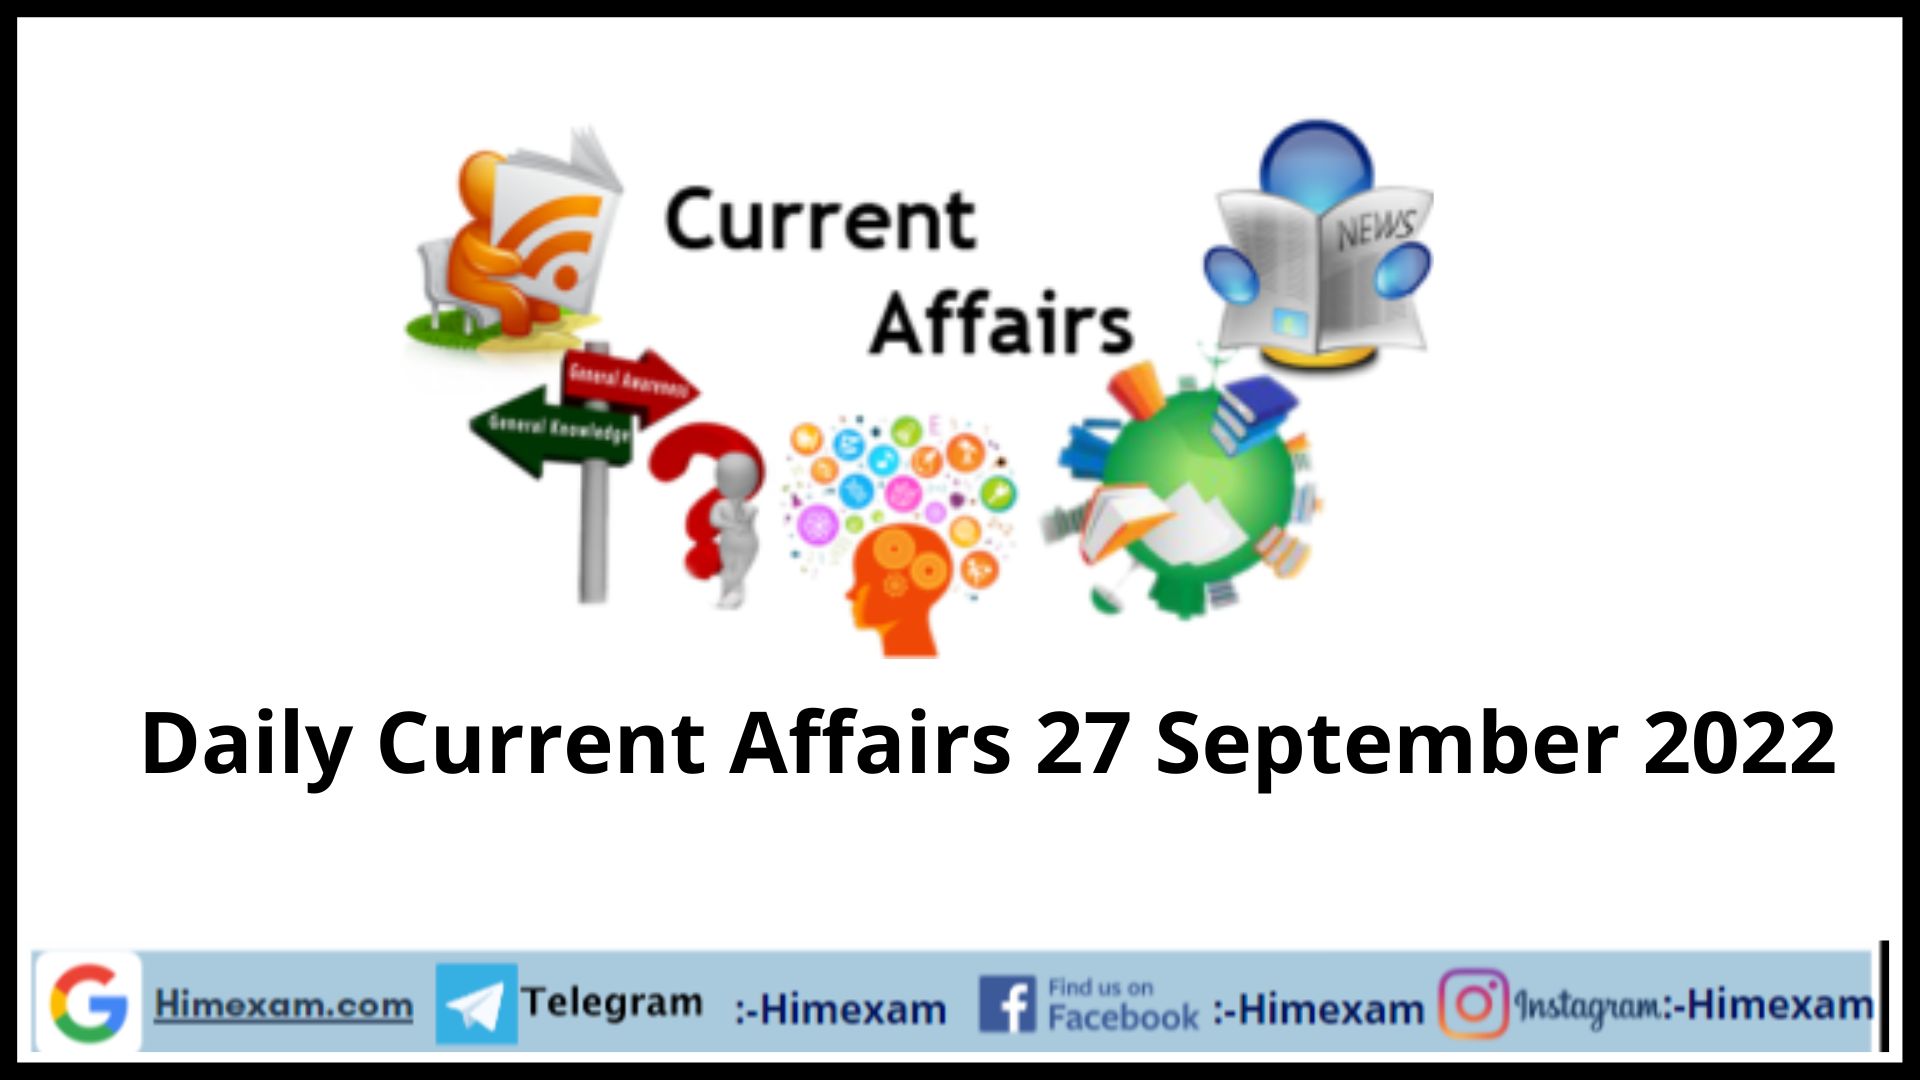 Daily Current Affairs 27 September 2022